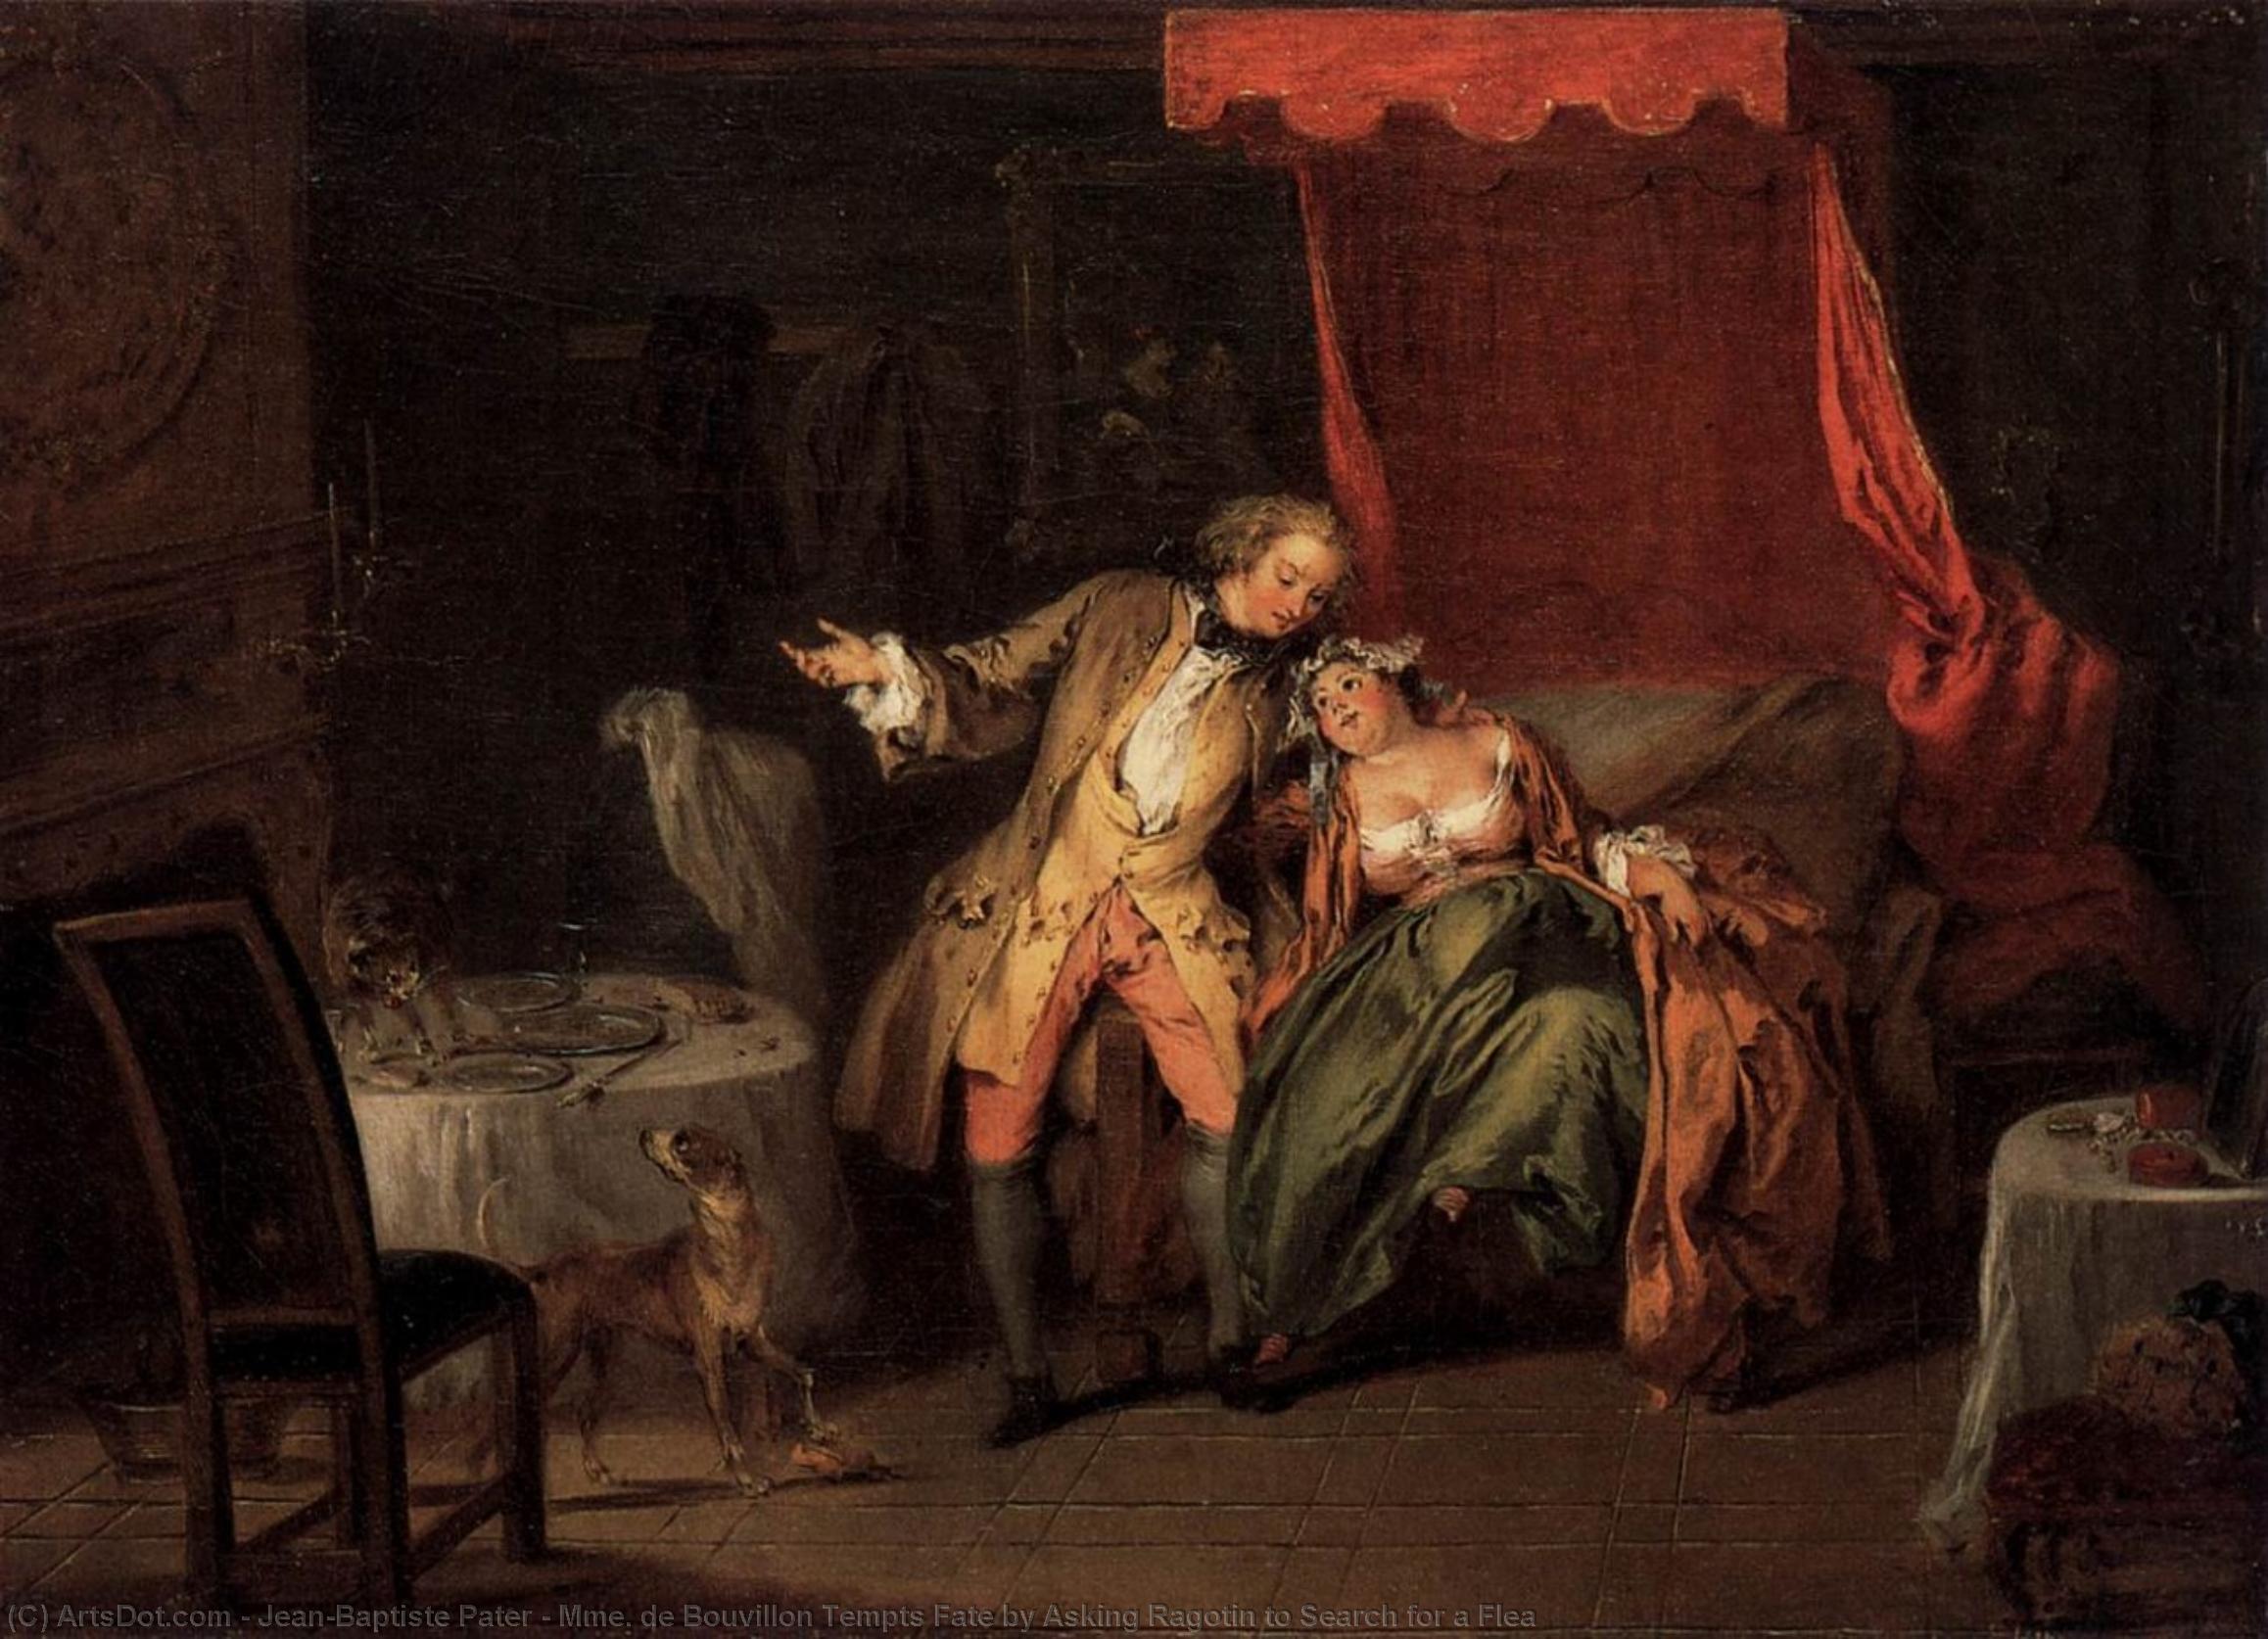 Order Paintings Reproductions Mme. de Bouvillon Tempts Fate by Asking Ragotin to Search for a Flea by Jean-Baptiste Pater (1695-1736, France) | ArtsDot.com